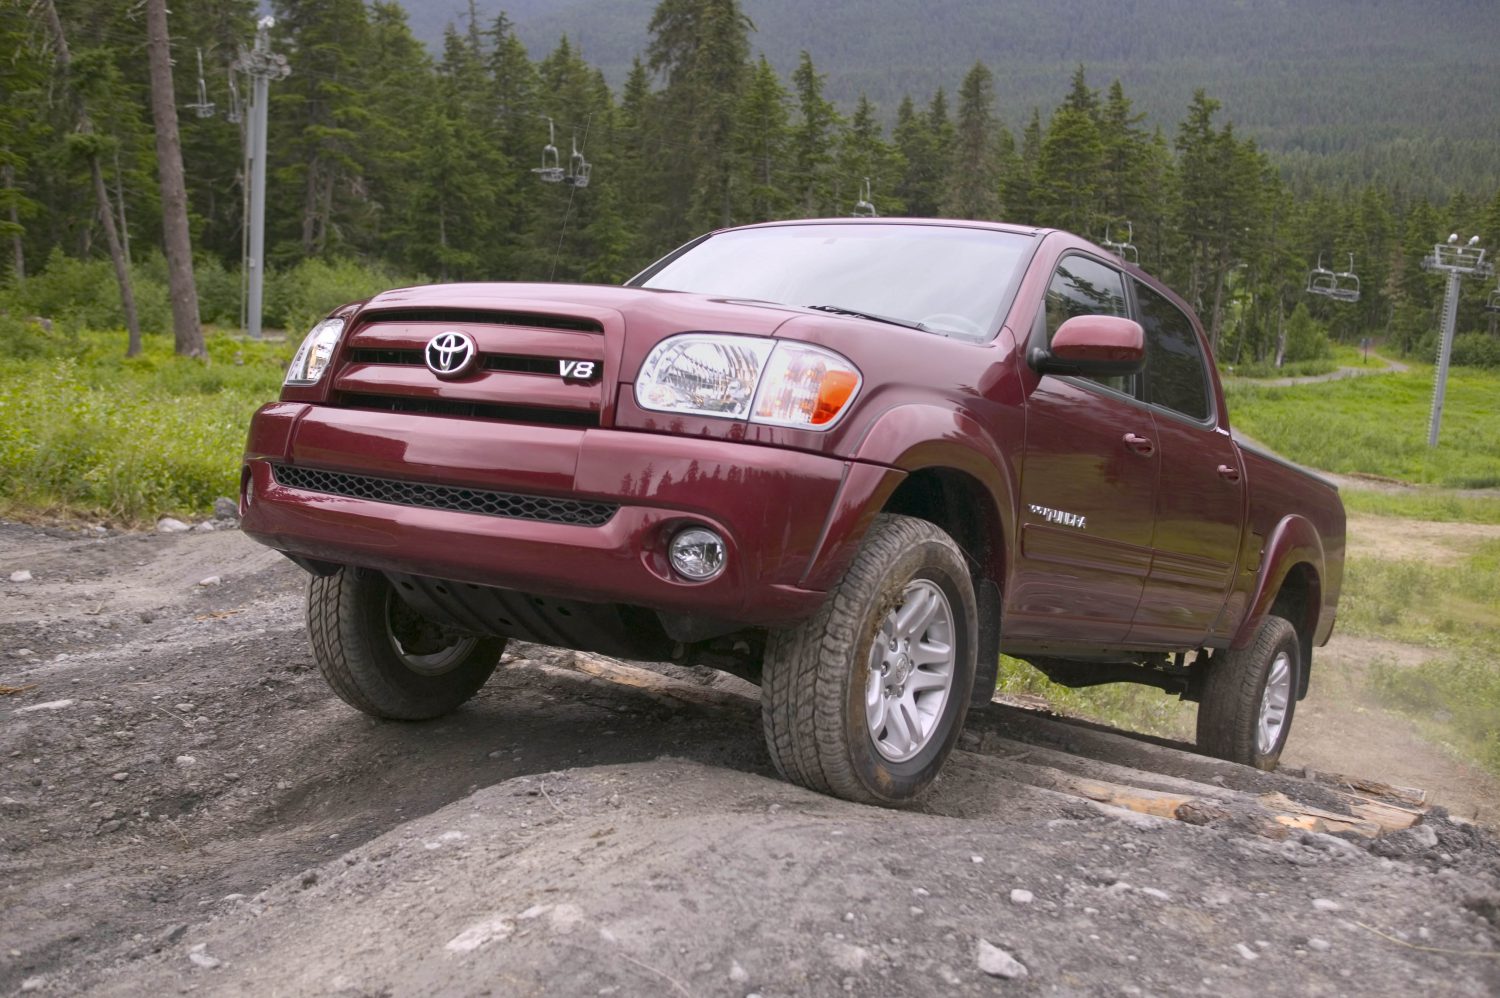 Red 2006 Toyota Tundra climbing a mountain trail in front of a ski lift and wooded hills.